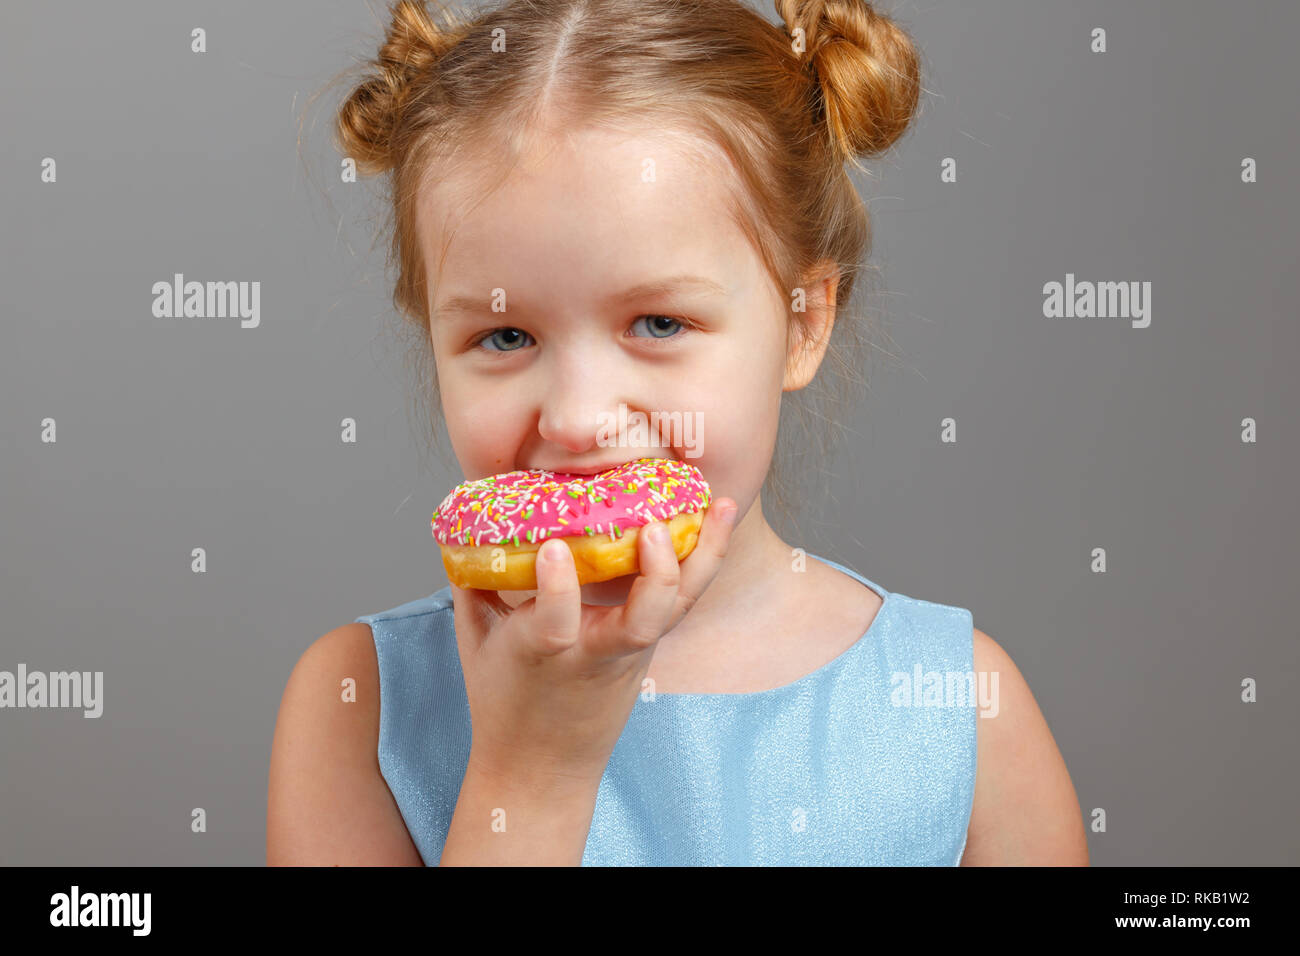 A cute little baby girl in a blue dress bites a delicious pink donut. Gray background, portrait, studio. Stock Photo